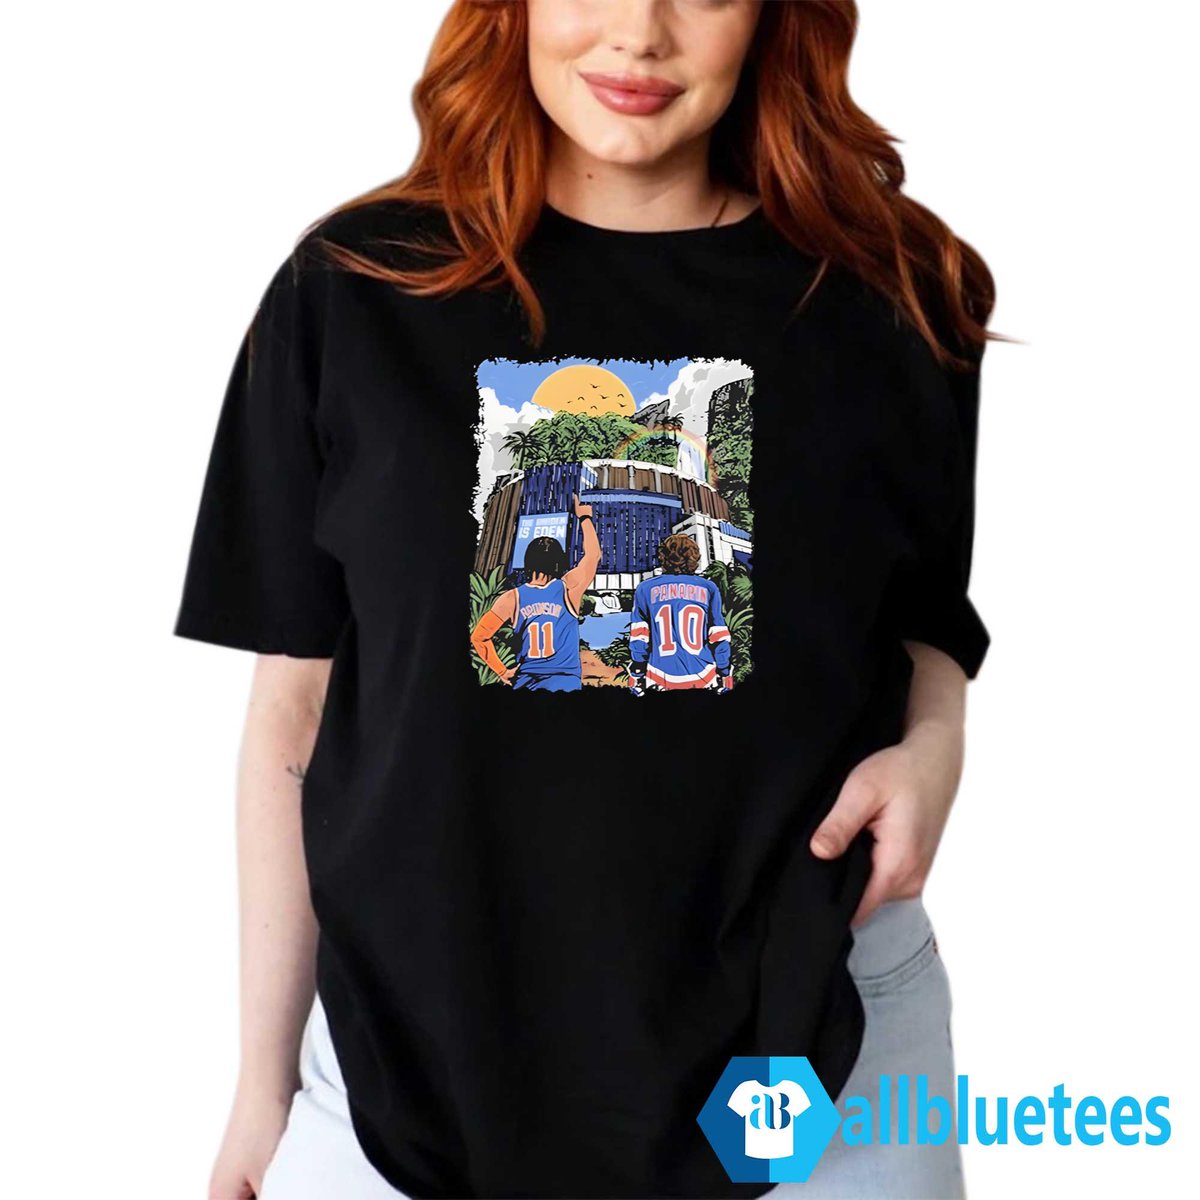 🍃 Step into a world of beauty and bliss with our Matty Jack The Garden Is Eden! 🌺 Celebrate the magic of nature with this enchanting tee. Get yours today and let your fashion sense blossom!
allbluetees.com/product/matty-…